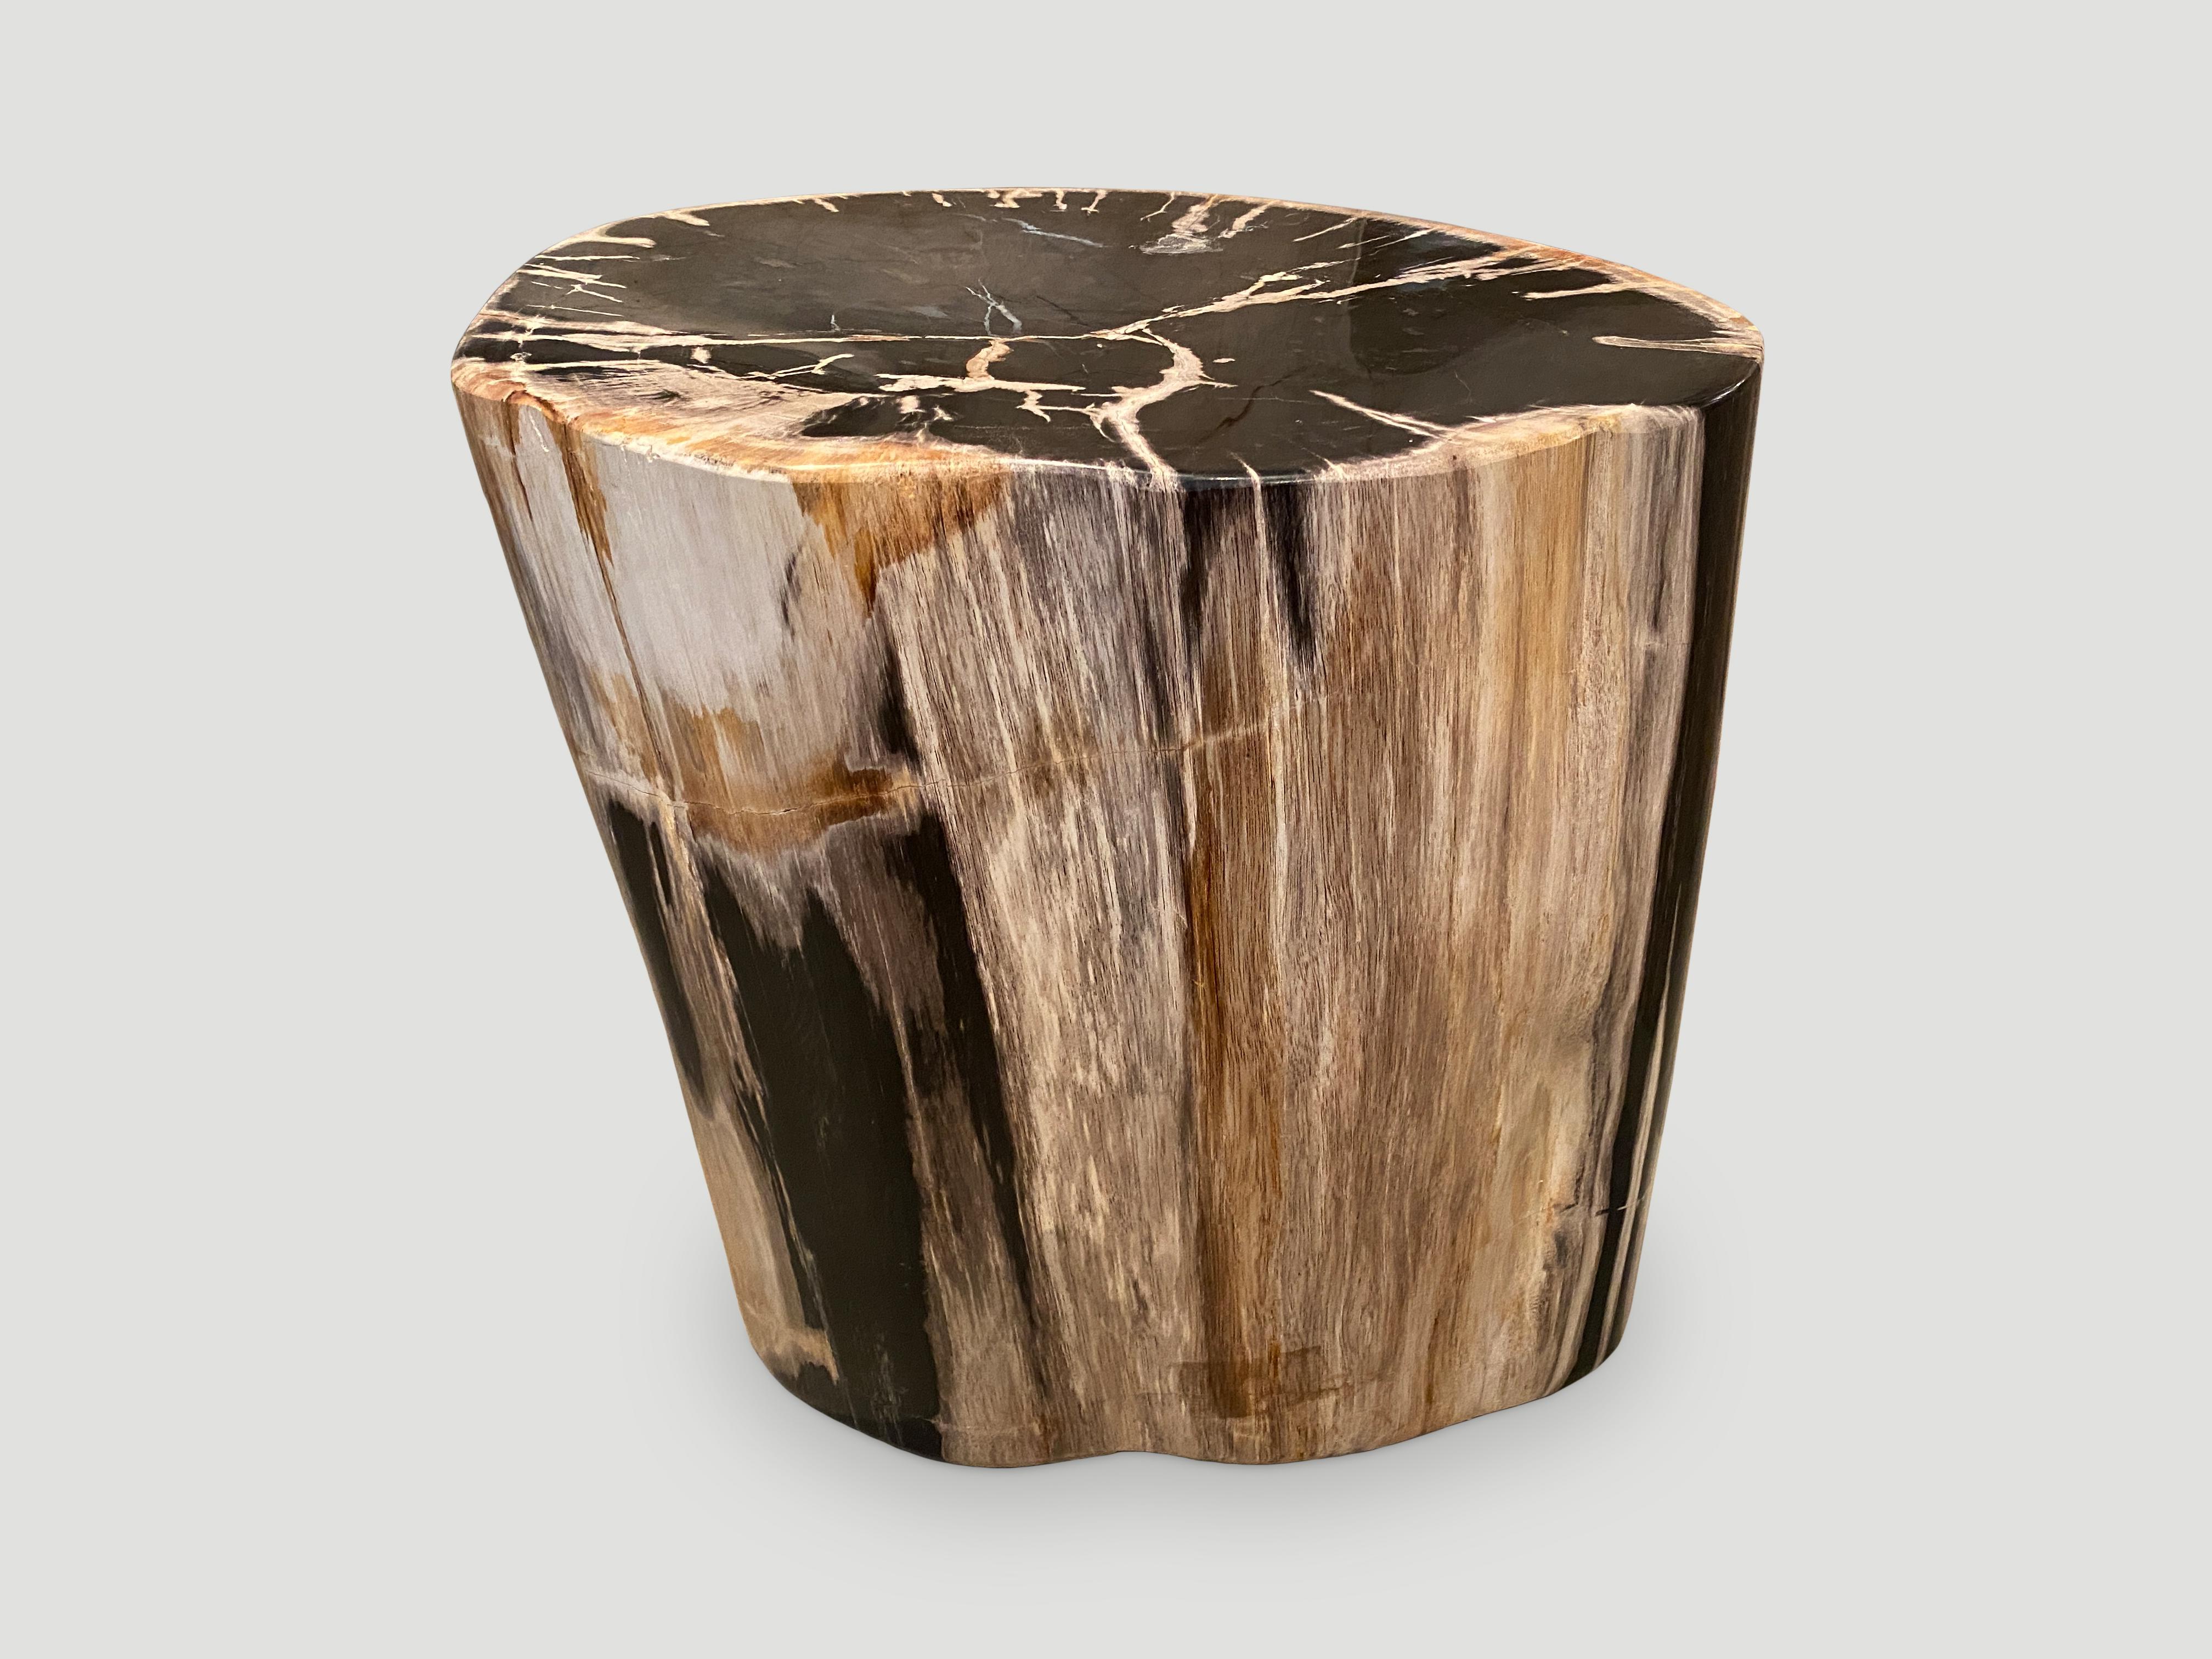 Stunning bold tones on this impressive high quality petrified wood side table. This one has beautiful natural markings. It’s fascinating how Mother Nature produces these stunning 40 million year old petrified teak logs with such contrasting colors